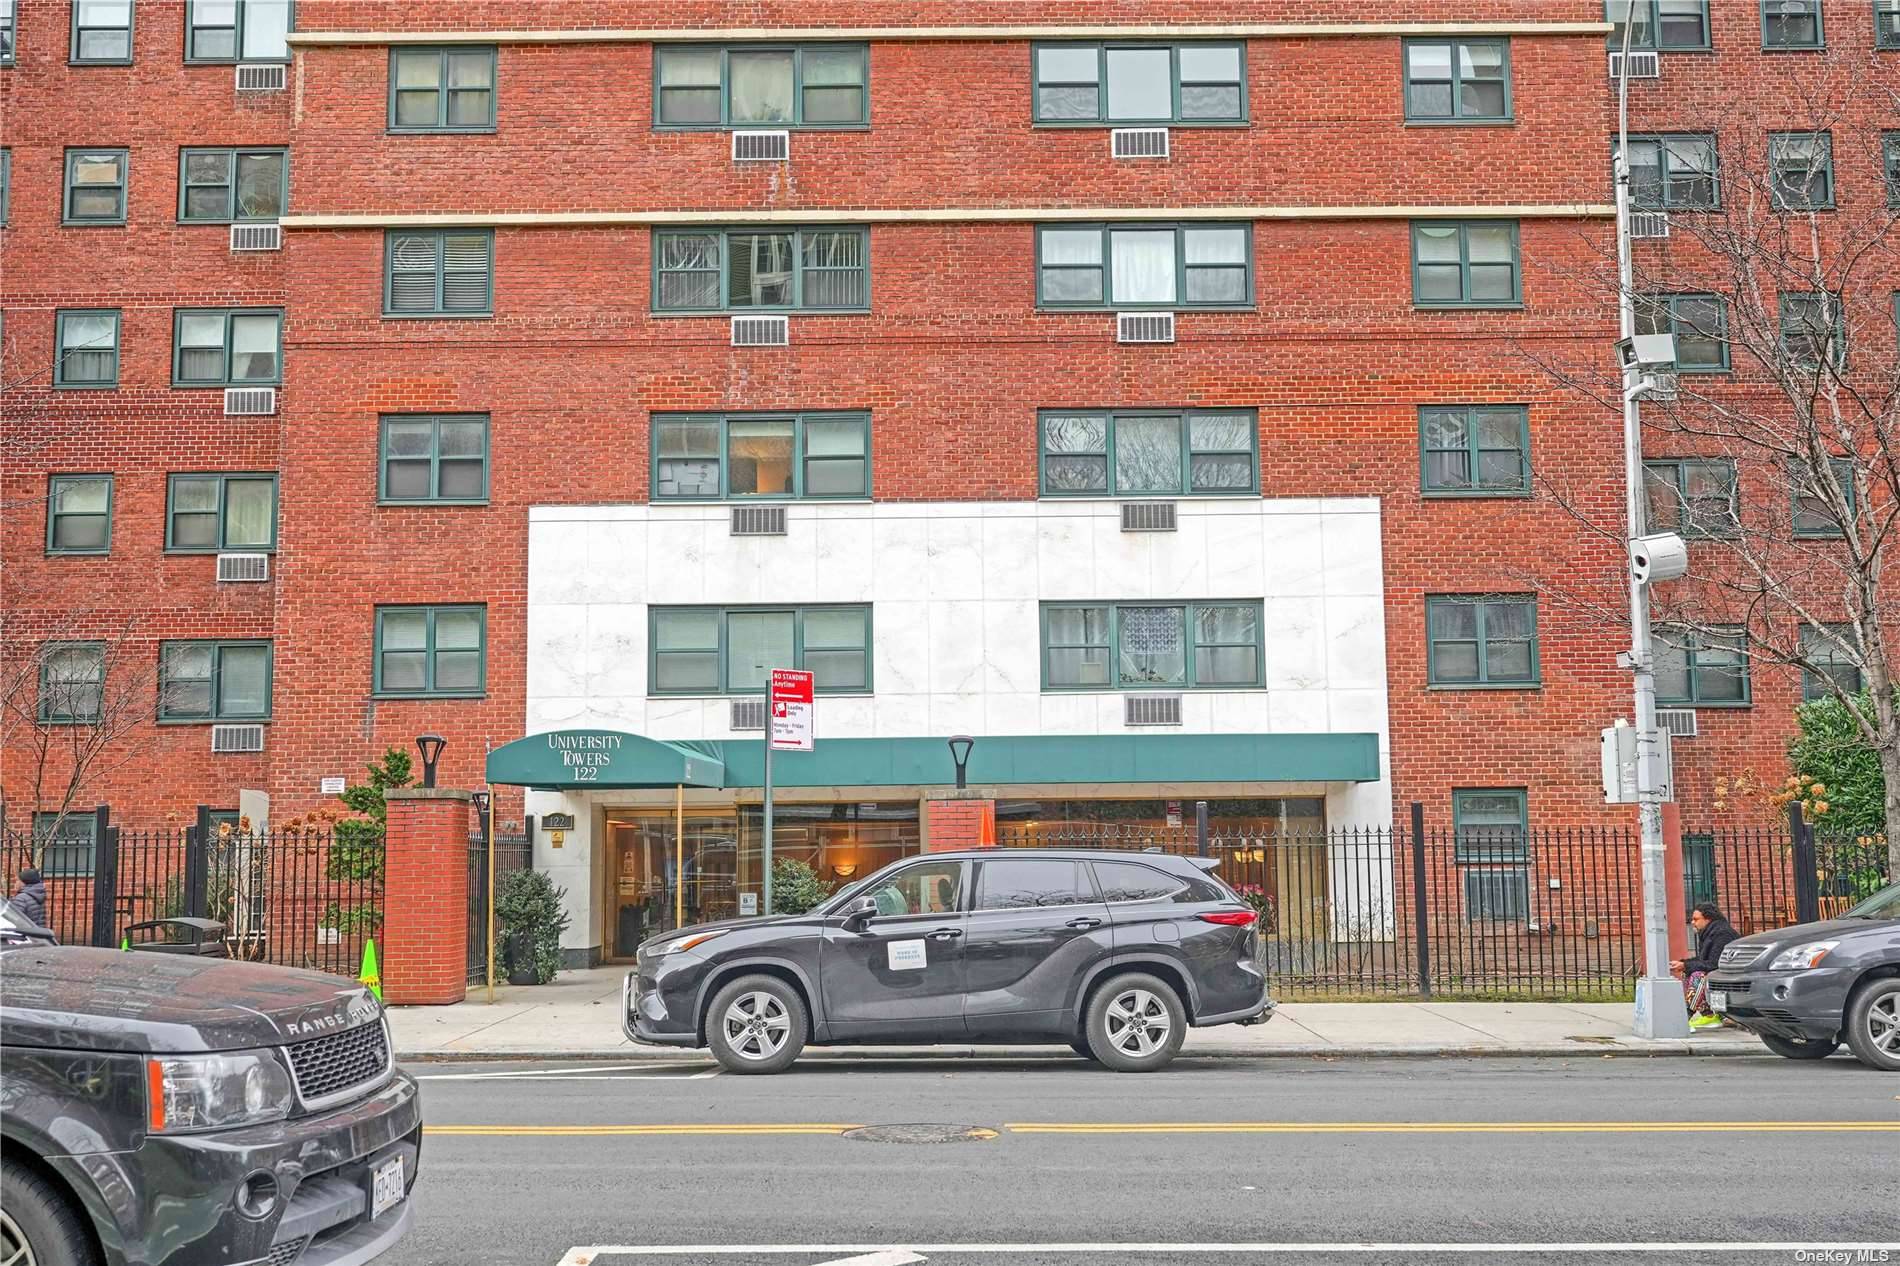 Nestled within the highly sought after University Towers cooperative building in Downtown Brooklyn, this spacious 3 bedroom, 2 bathroom co op apartment redefines urban living.